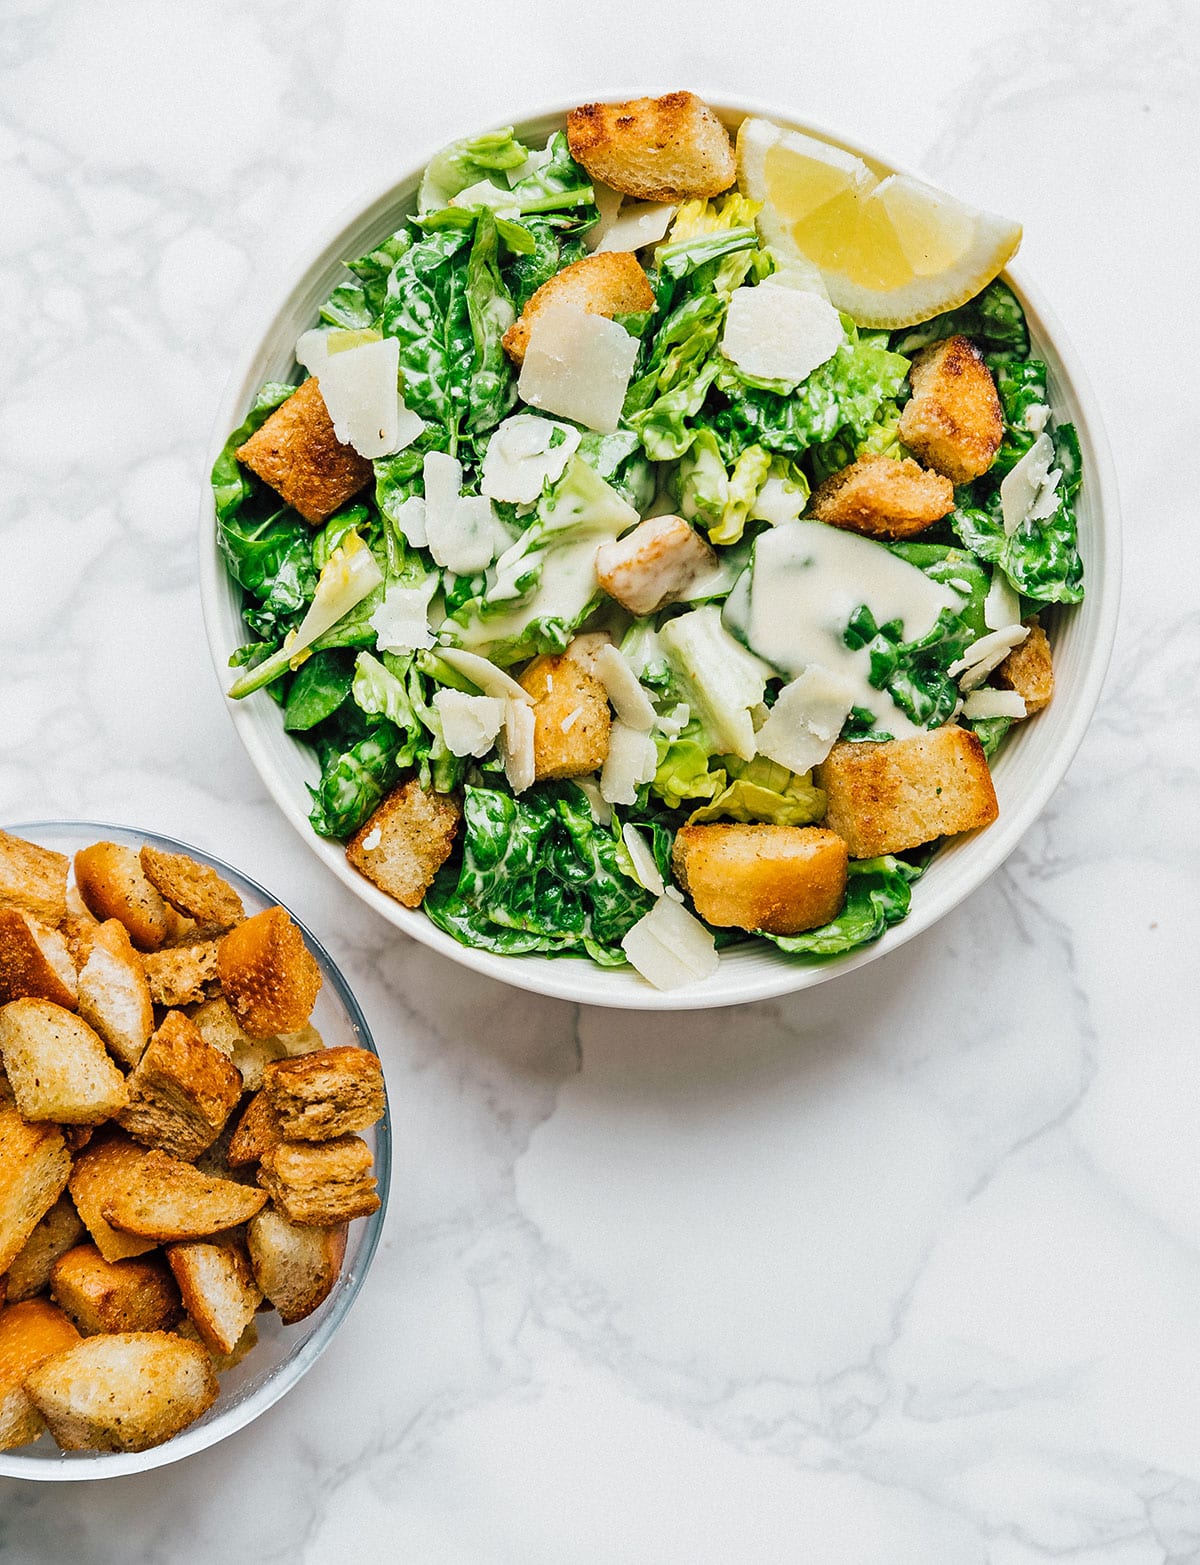 Salad on a marble background with homemade croutons